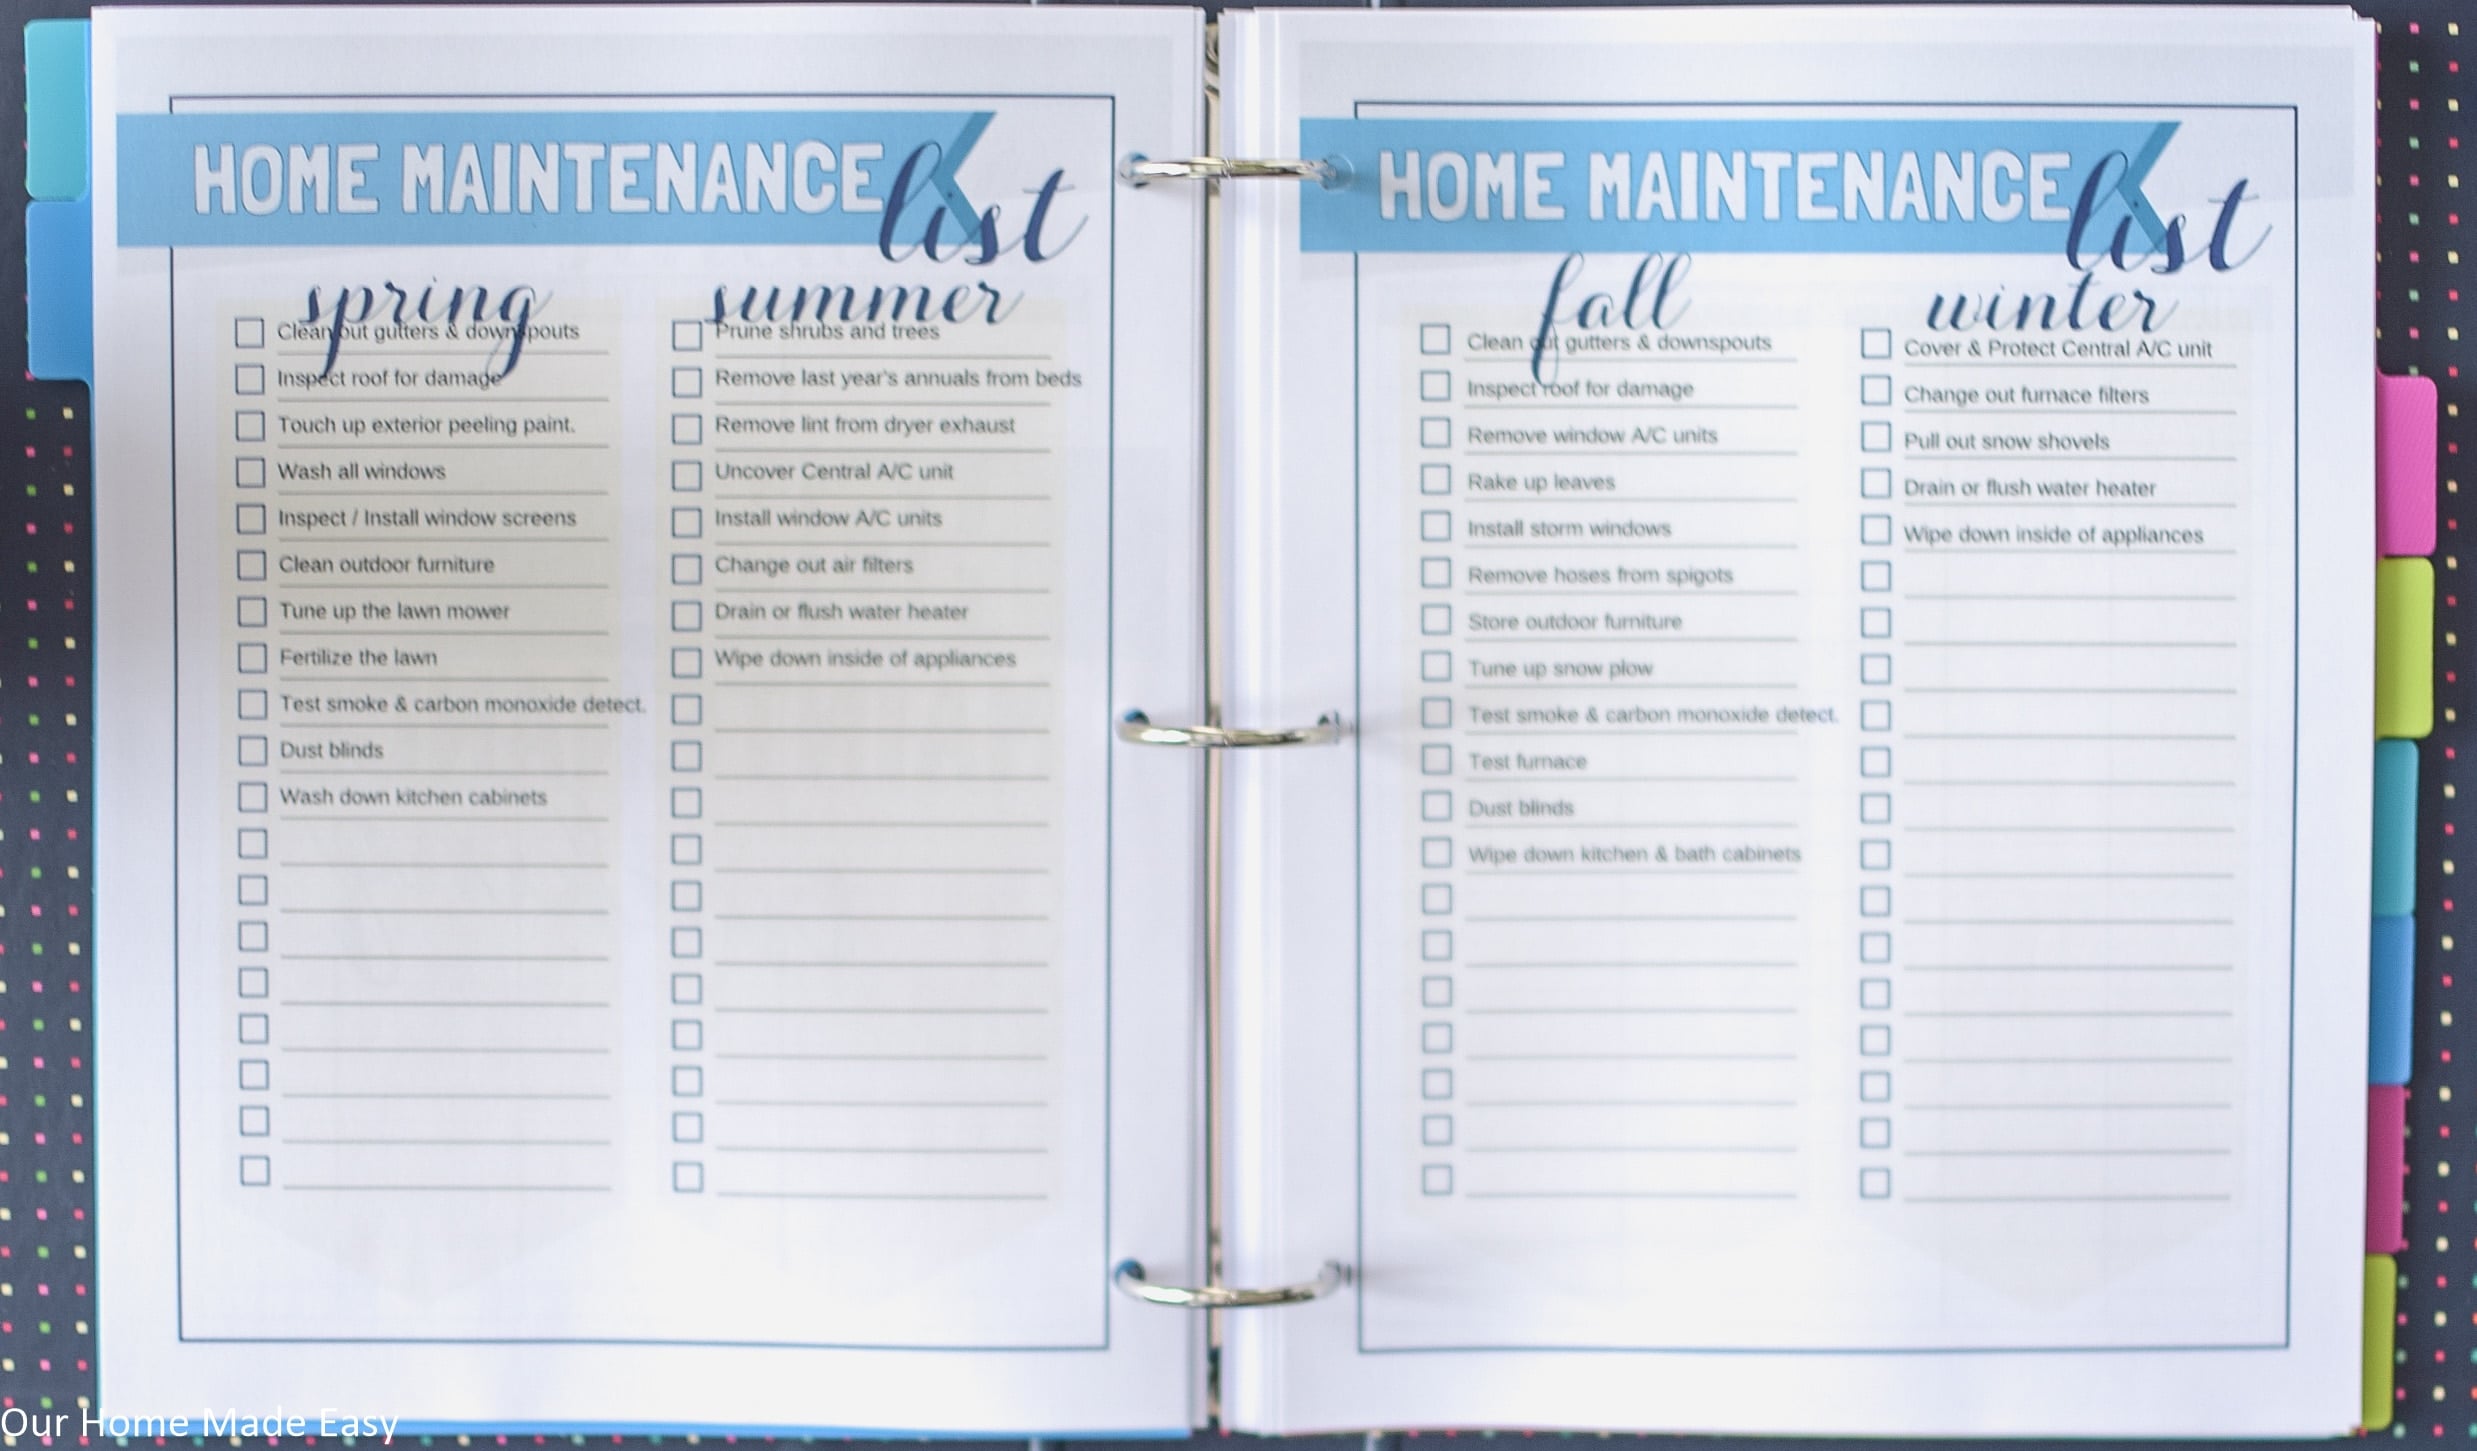 The Home Maintenance Checklist for Spring, Summer, Fall and Winter is just one of the many helpful home checklists in our Ultimate Home Binder